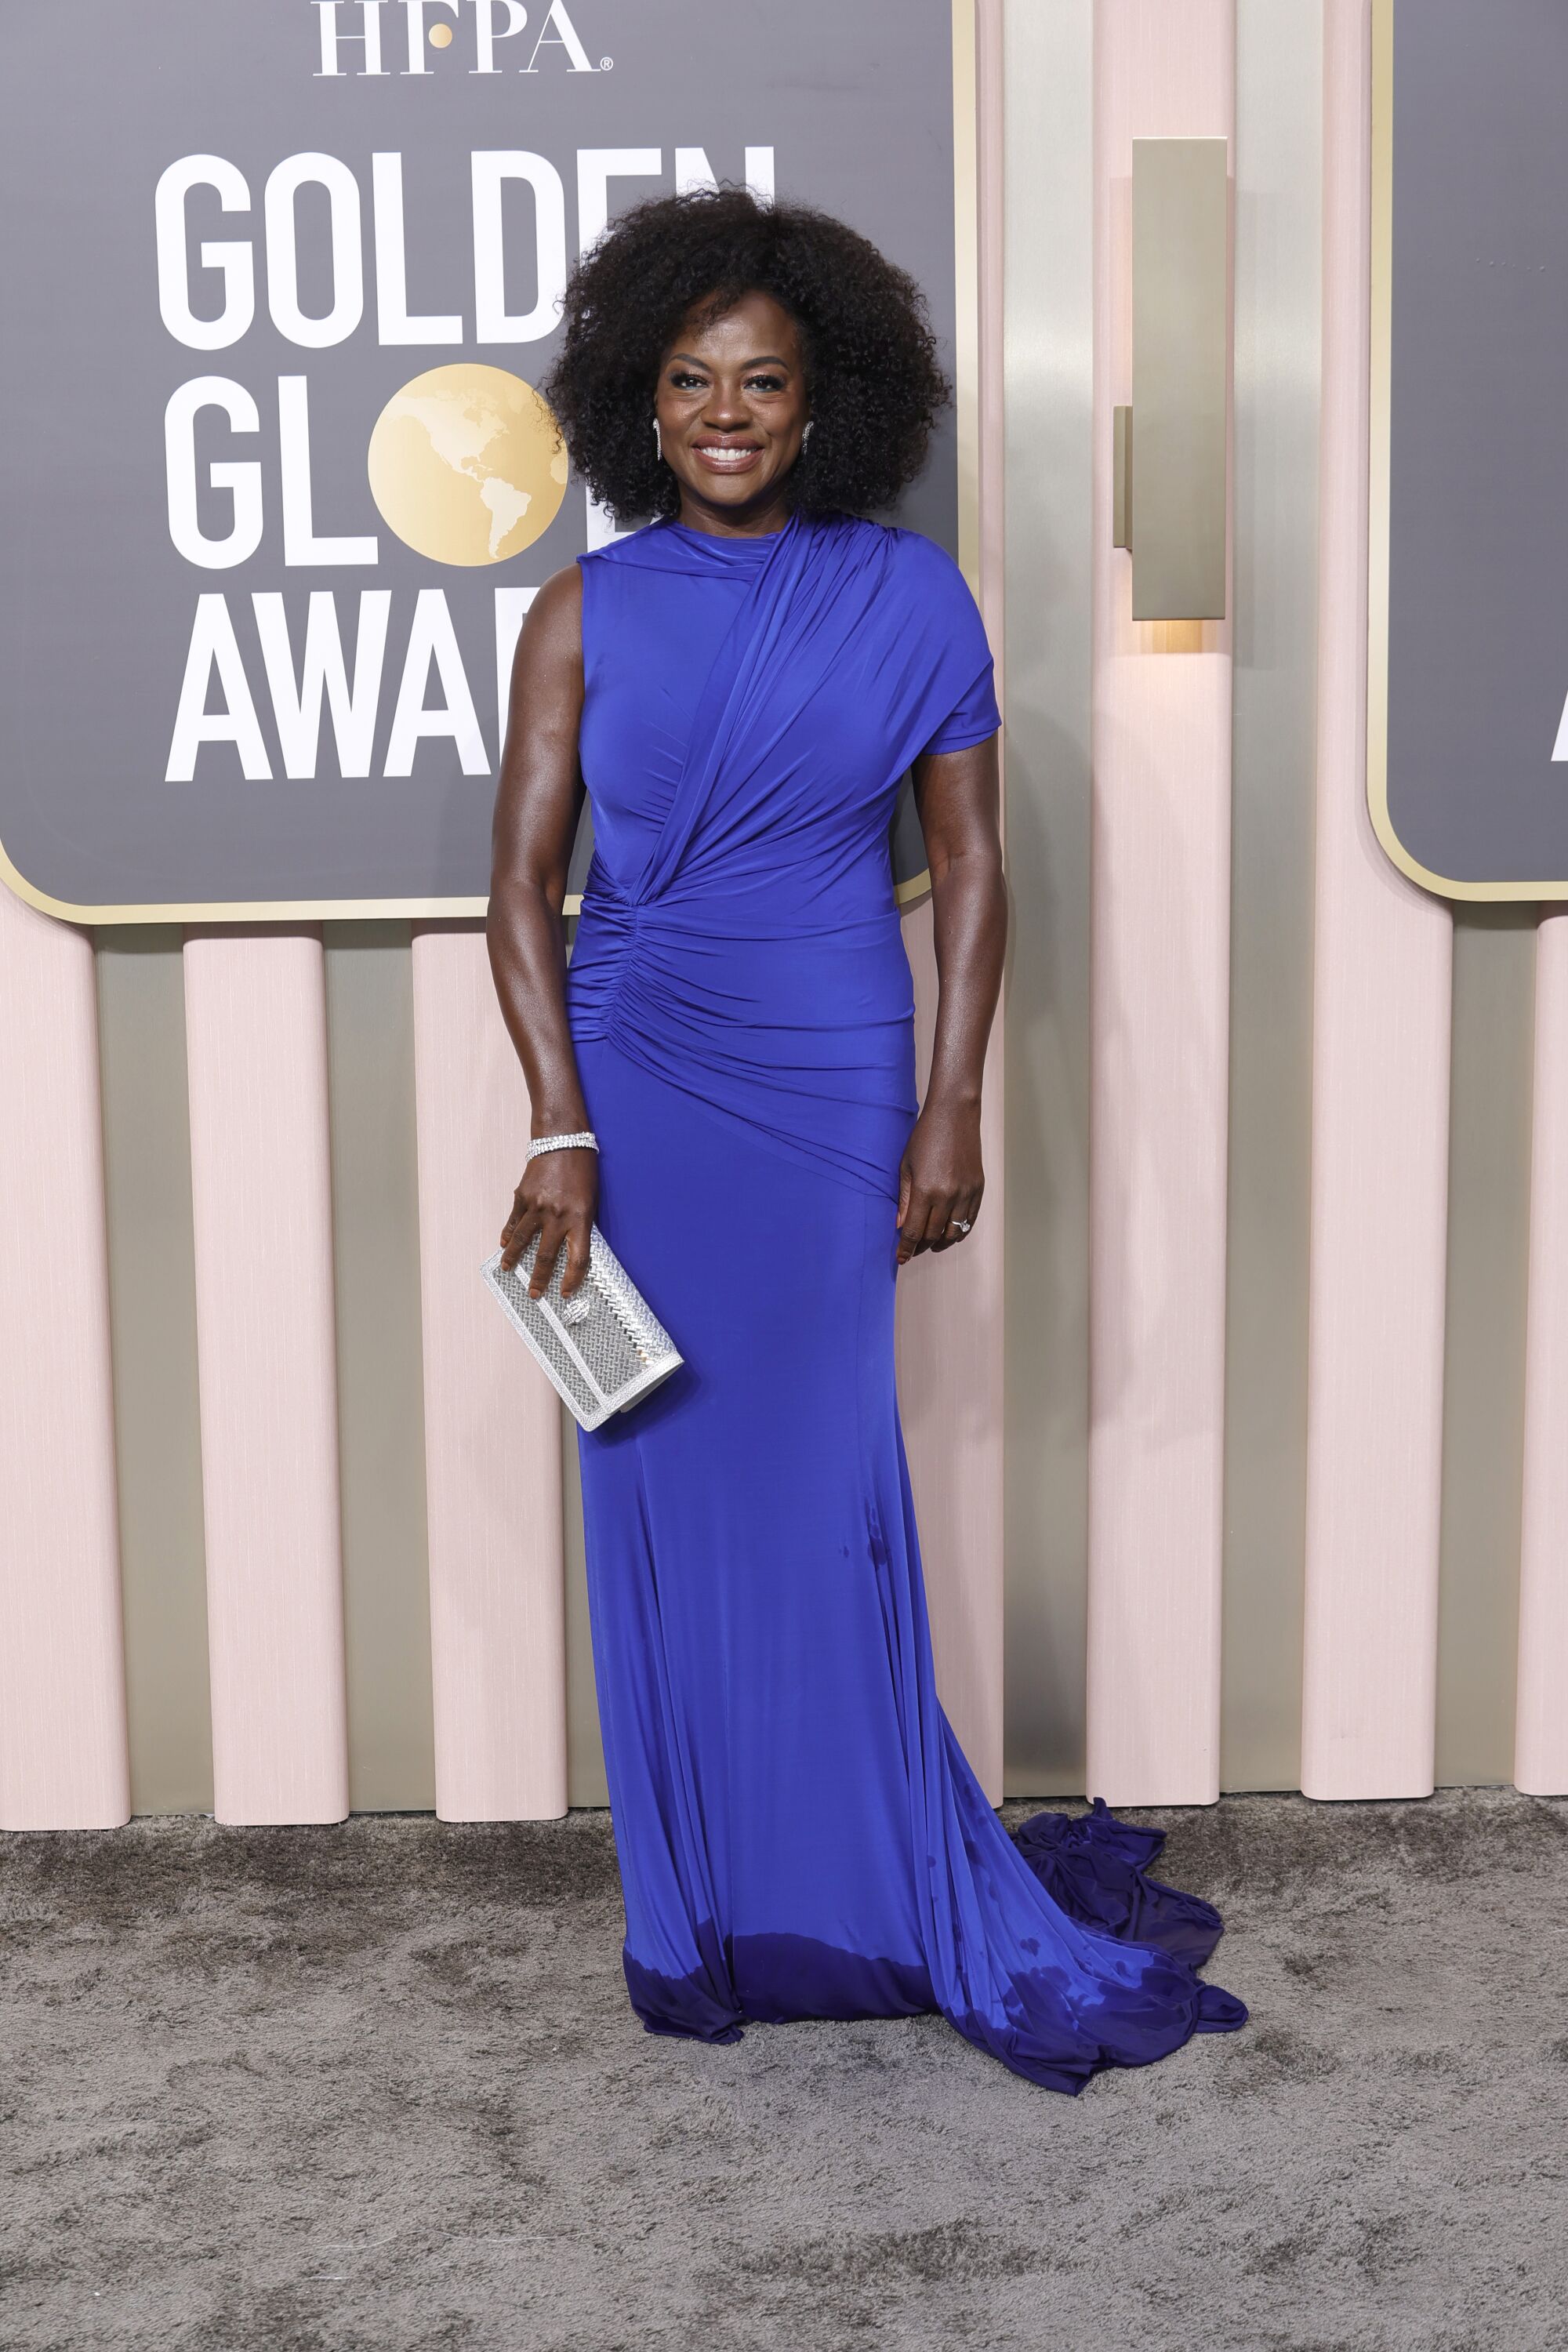 Viola Davis is the First Lady of the Golden Globes red carpet.